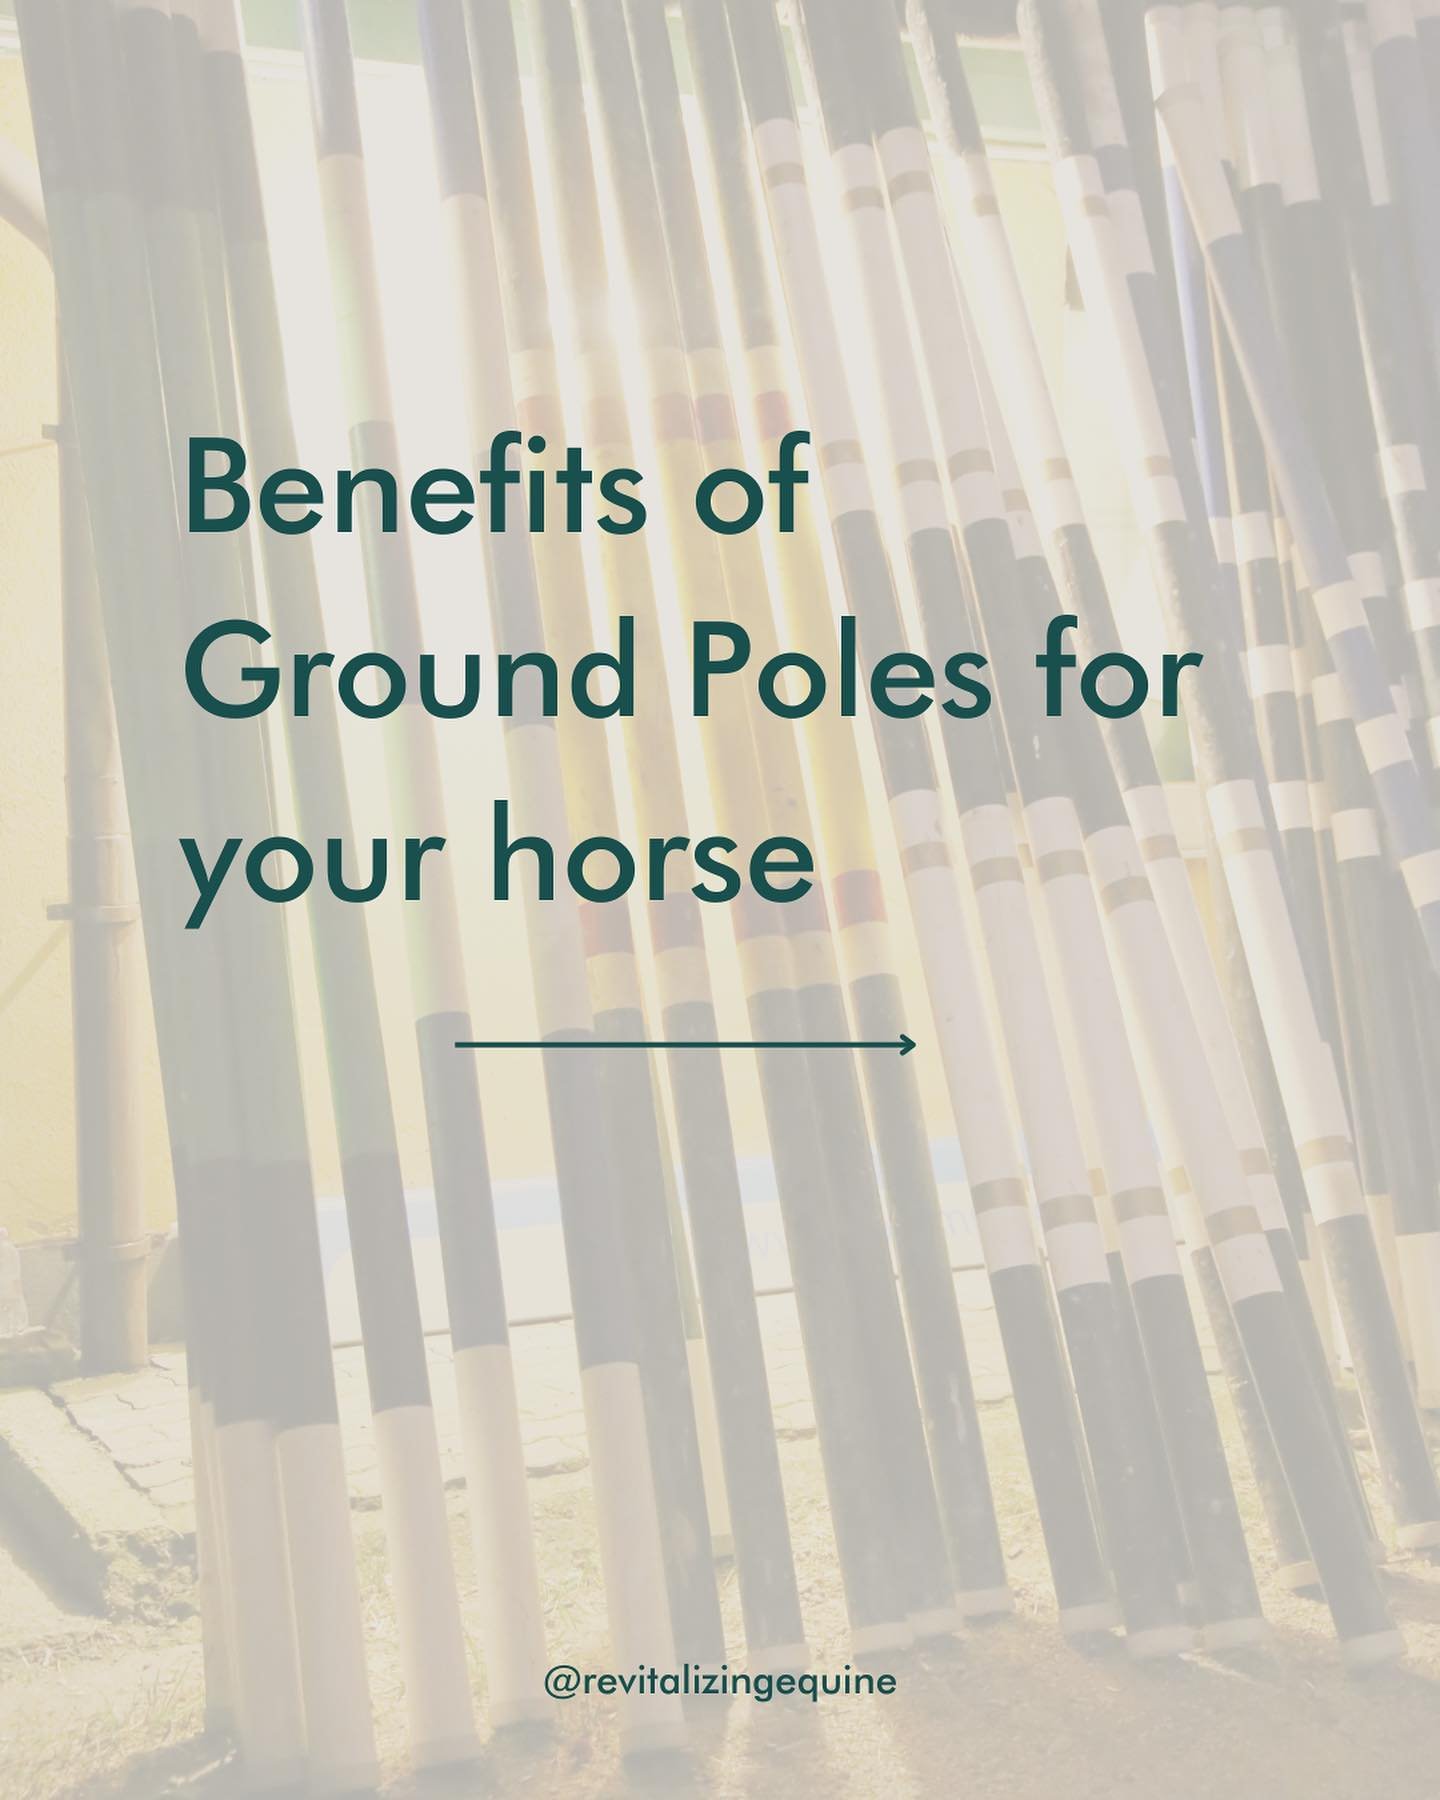 There is so much more to ground poles then just walking/trotting over them and calling it a day. They are proven to be one of the most important tools to have in your tool box. 

But why? 
Poles provide a great deal of muscle and mine effects that ca